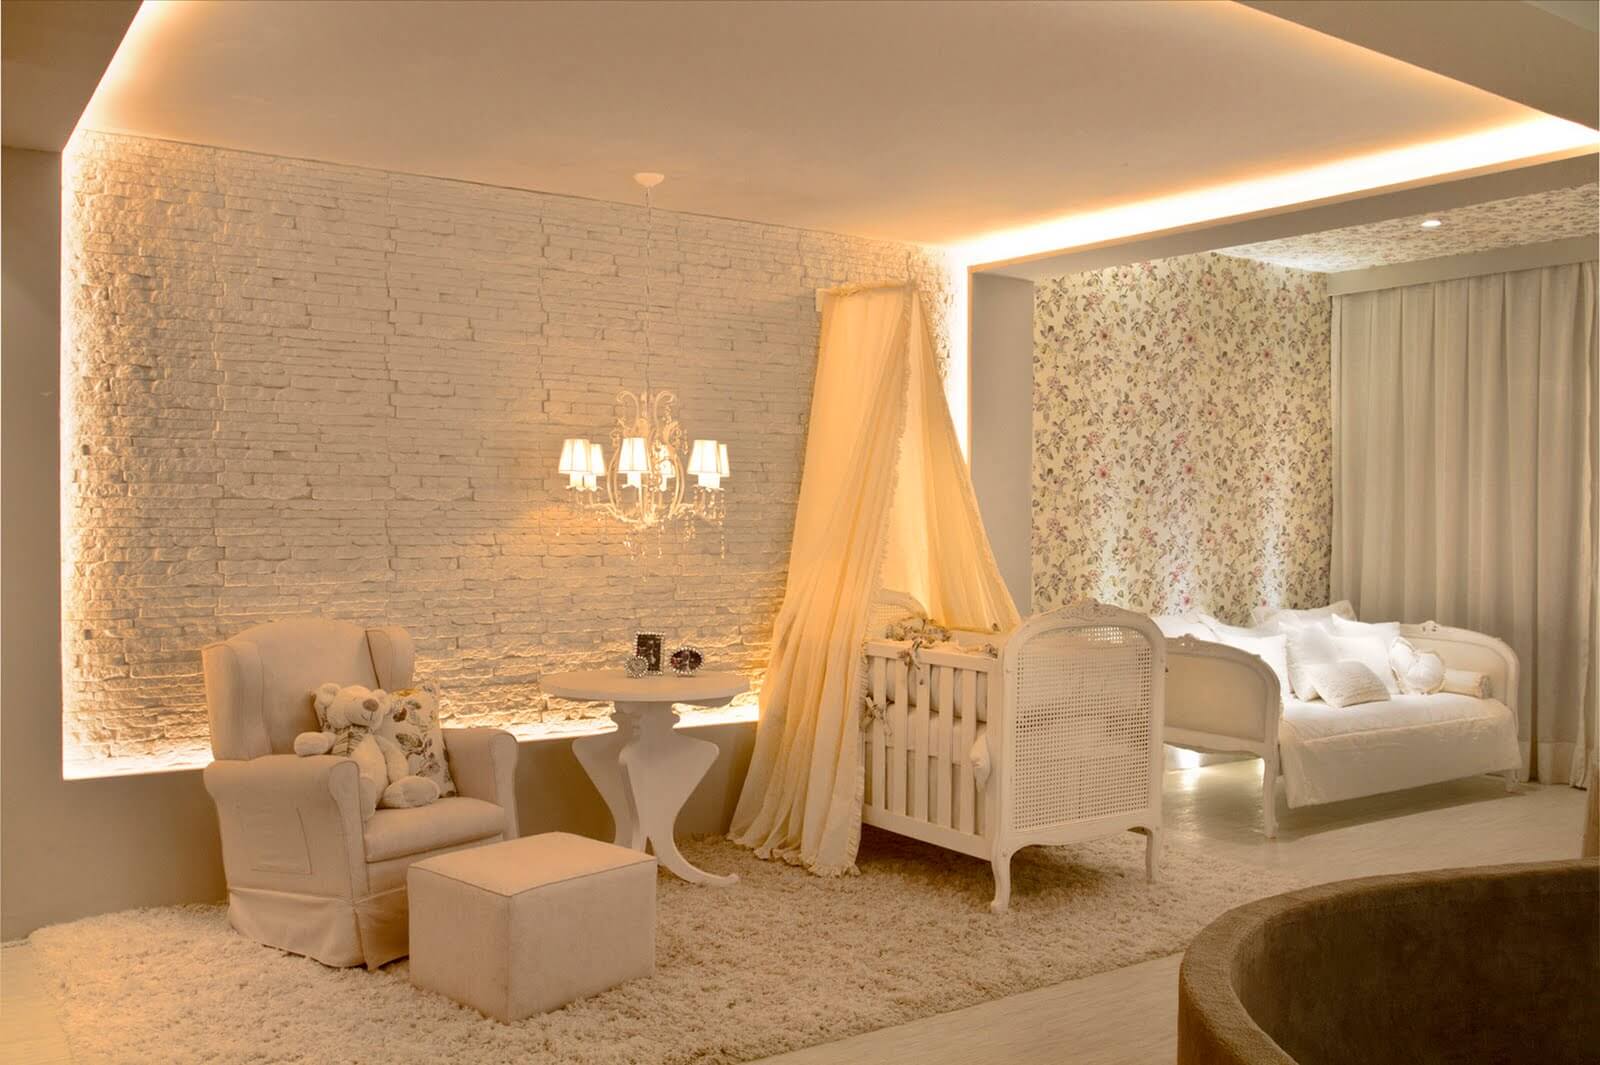 Room interior of young parents with ambient light